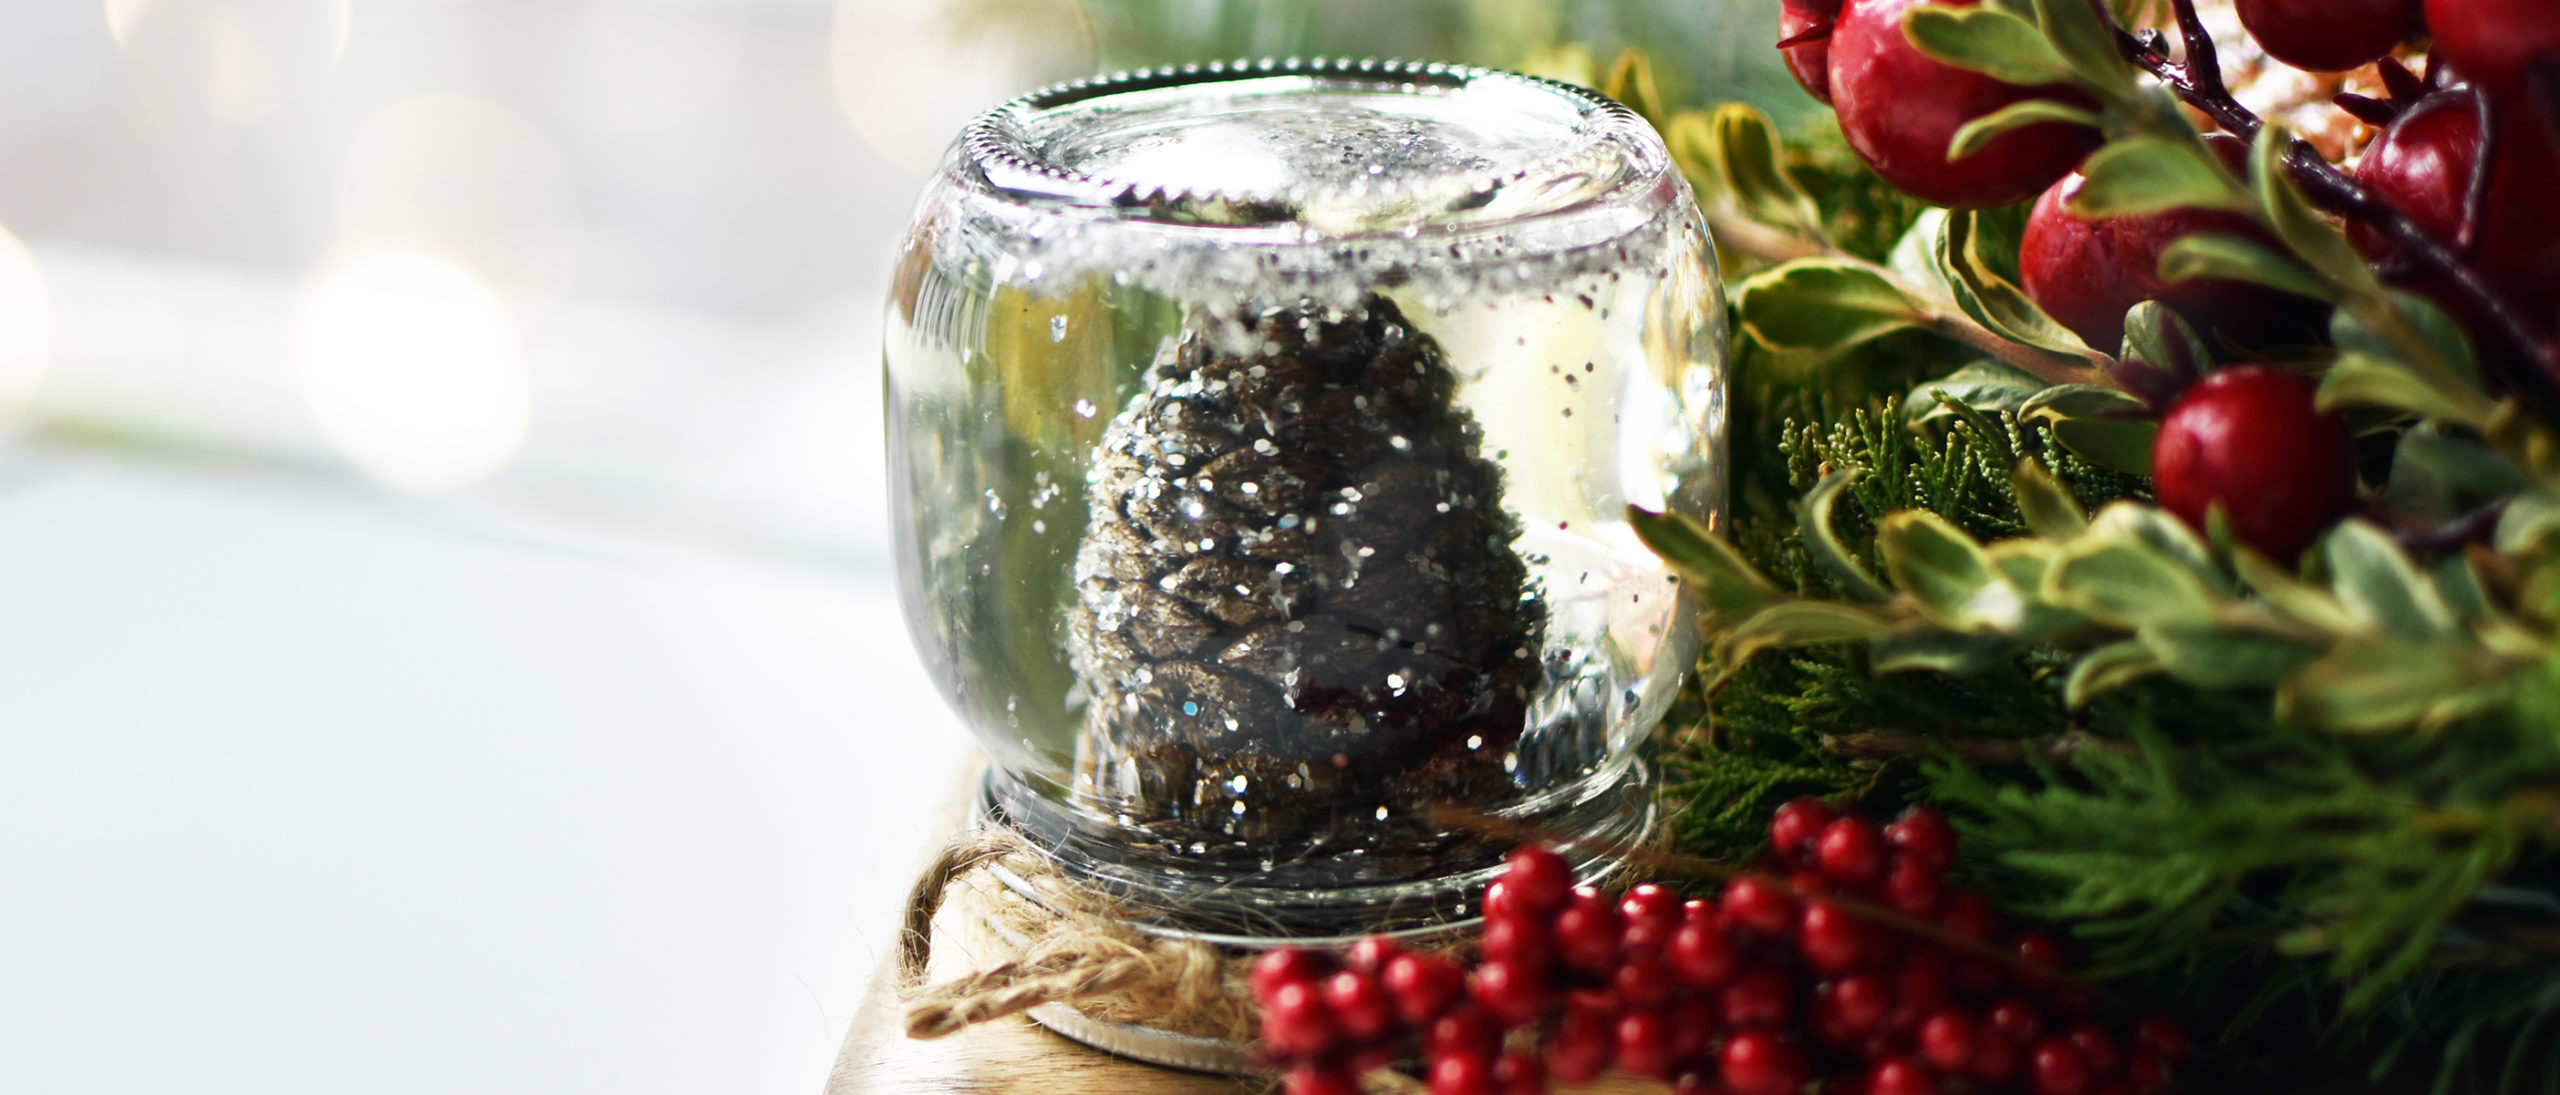 10 Simple Tips to Decorate Your Home for the Holidays On a Budget